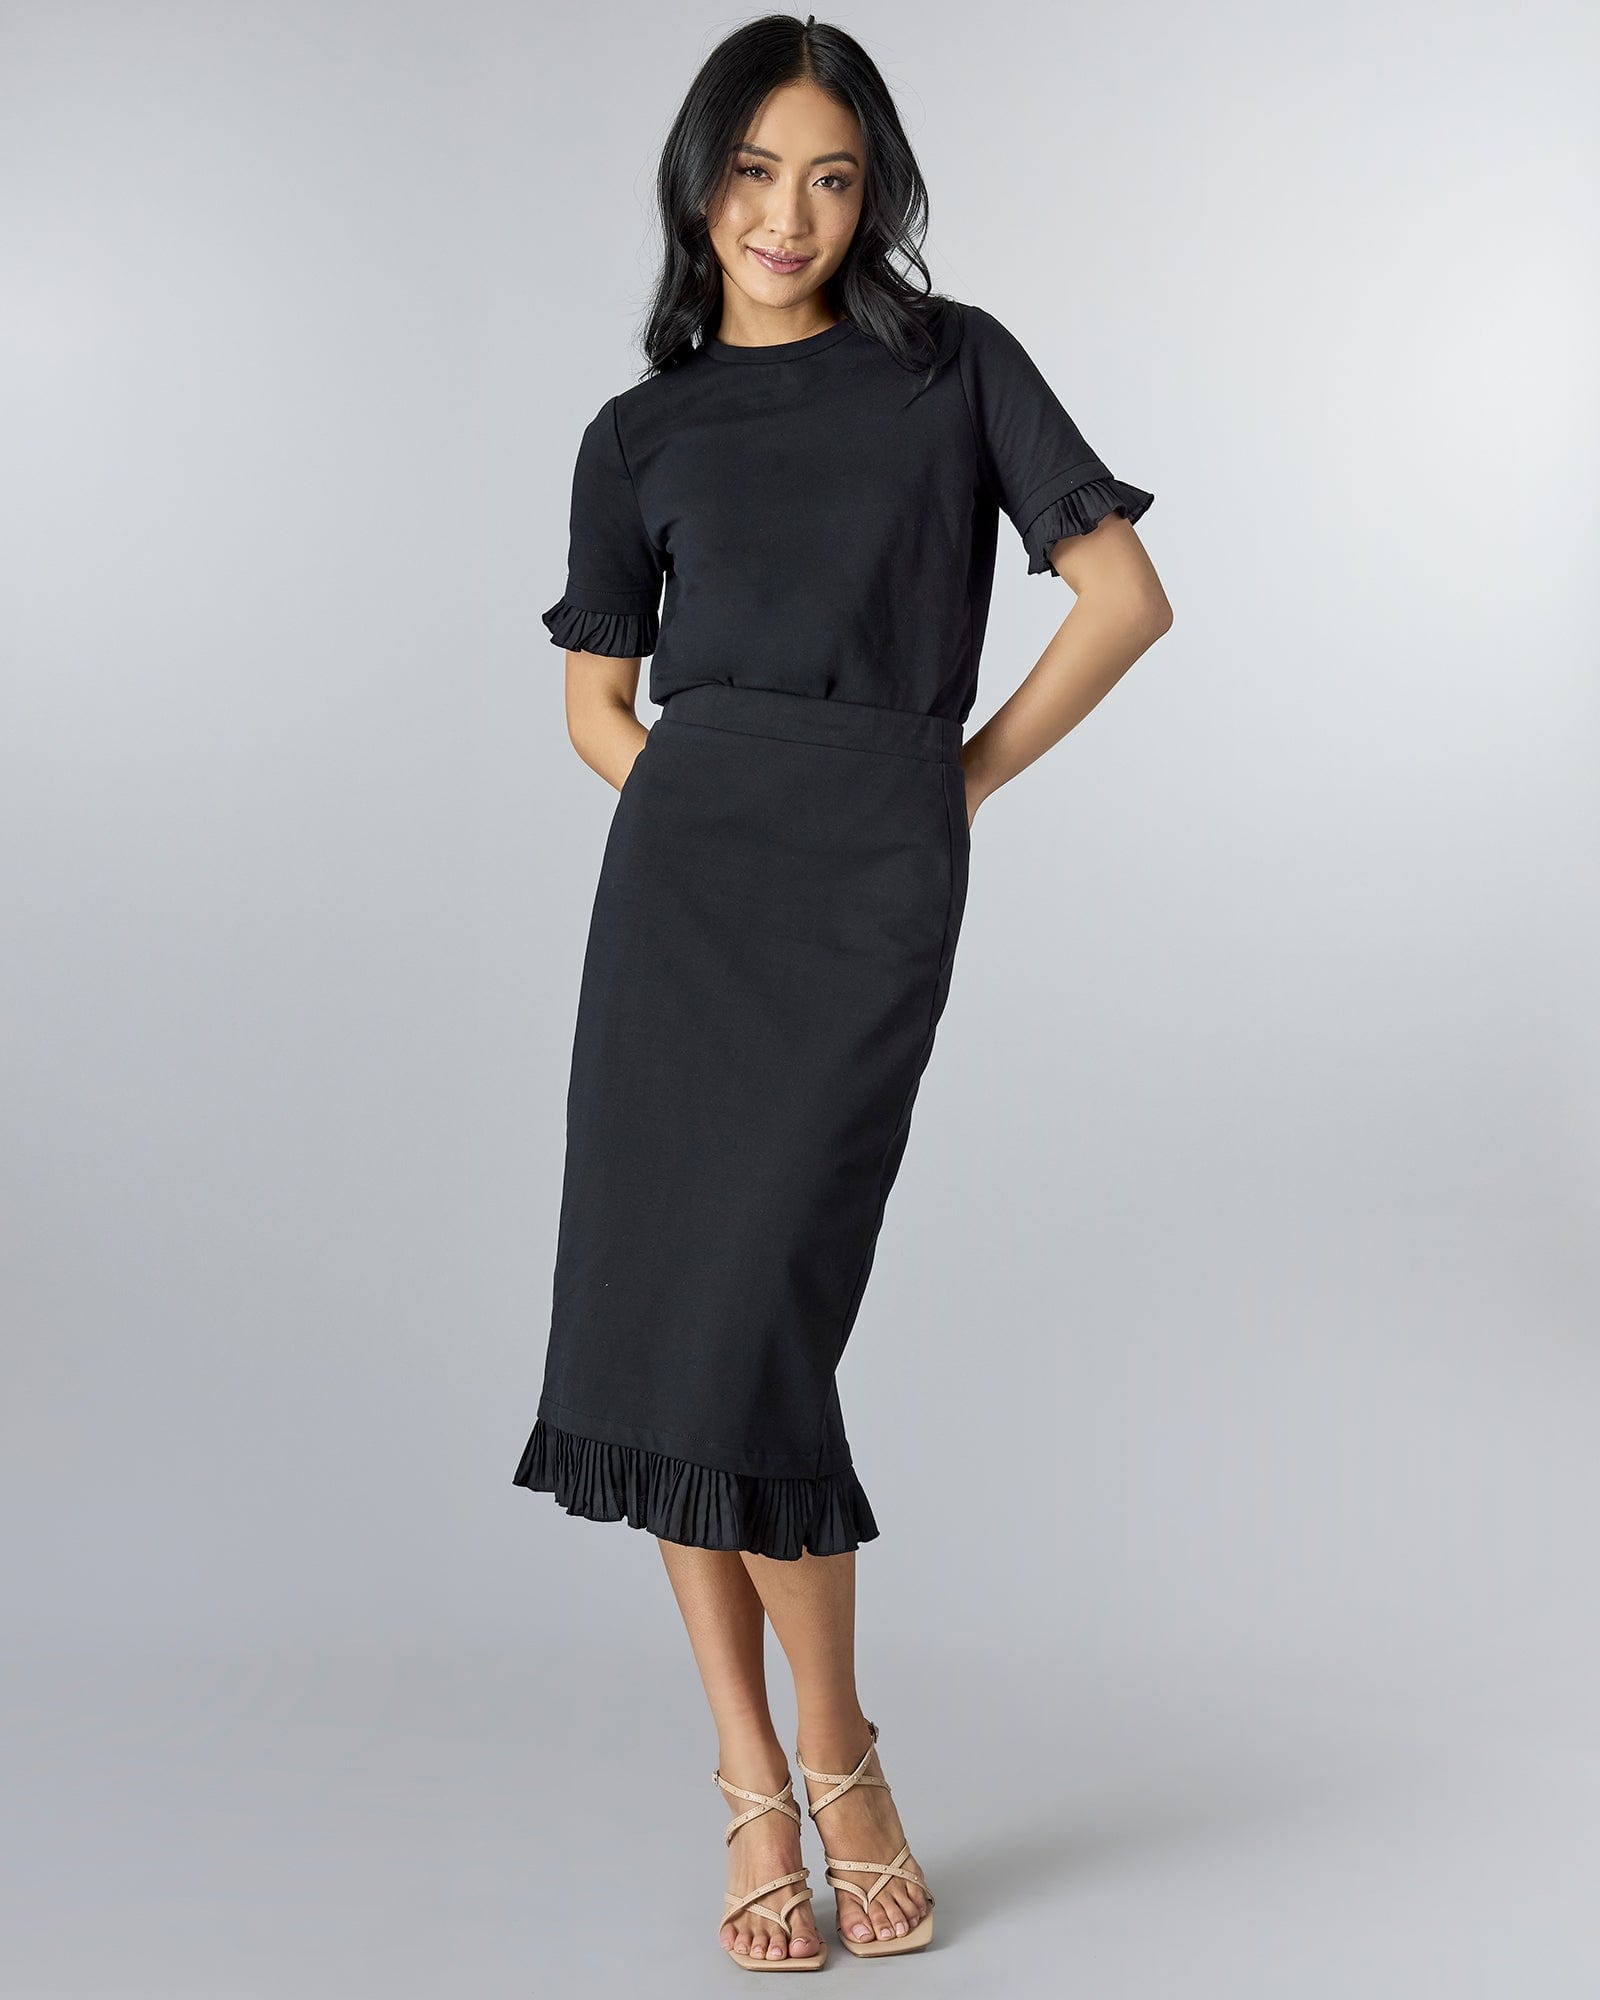 Woman in a black pencil skirt with ruffle at bottom.